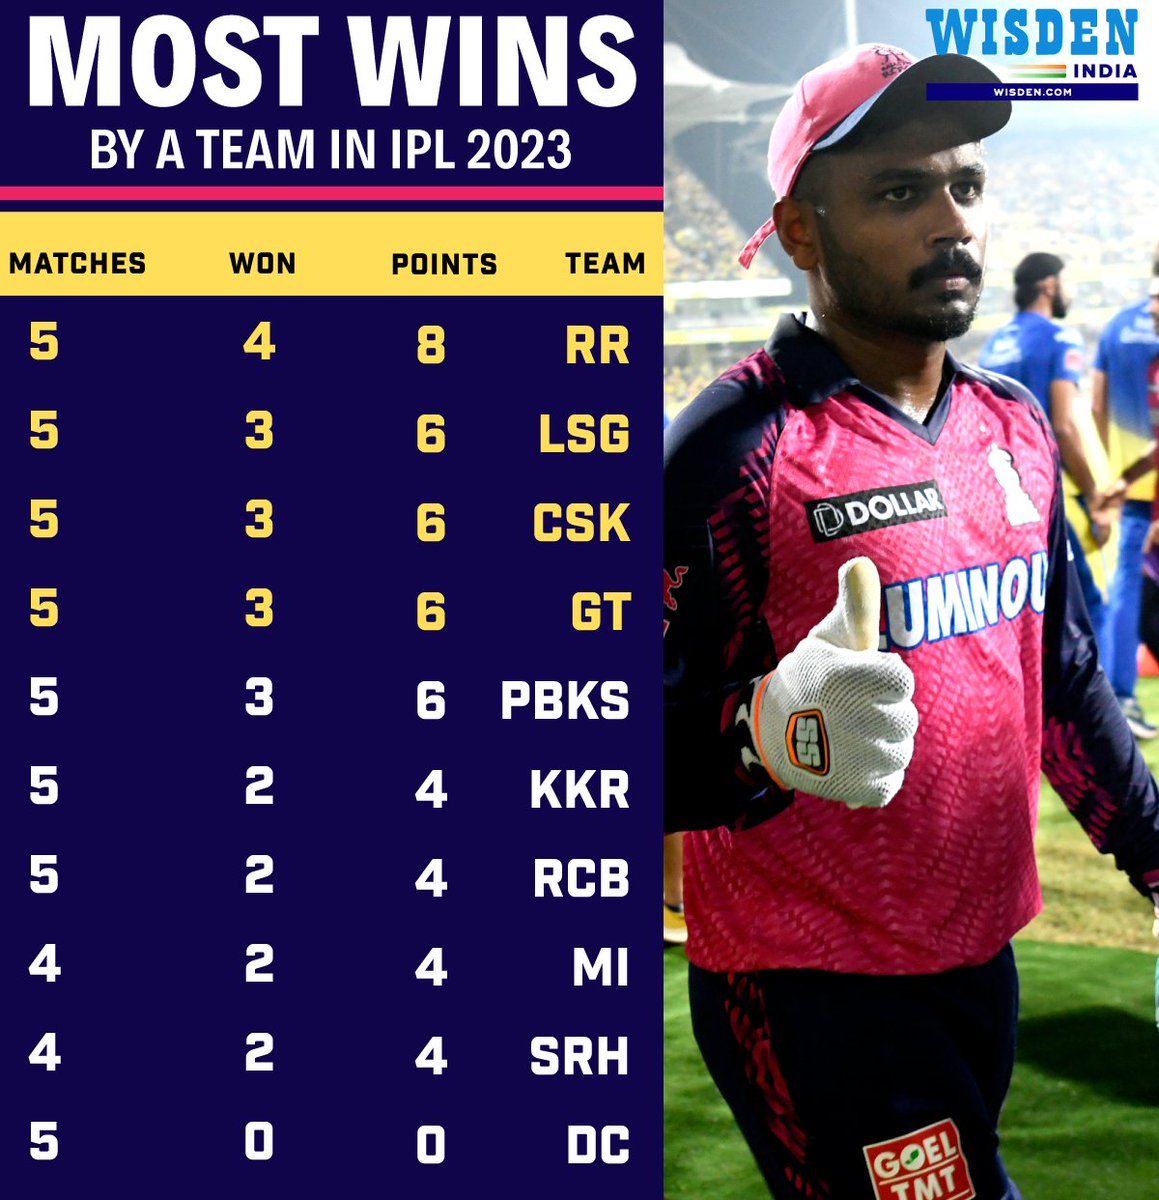 Against SRH - Won by 72 runs ✅
Against PBKS - Lost by 5 runs ❌
Against DC - Won by  57 runs ✅
Against CSK - Won by 3 runs ✅
Against GT - Won by 3 wickets✅

Rajasthan Royals are dominating IPL 2023 👏 🔥

#SanjuSamson #ShimronHetmyer #RaviAshwin #IPL2023 #Cricket